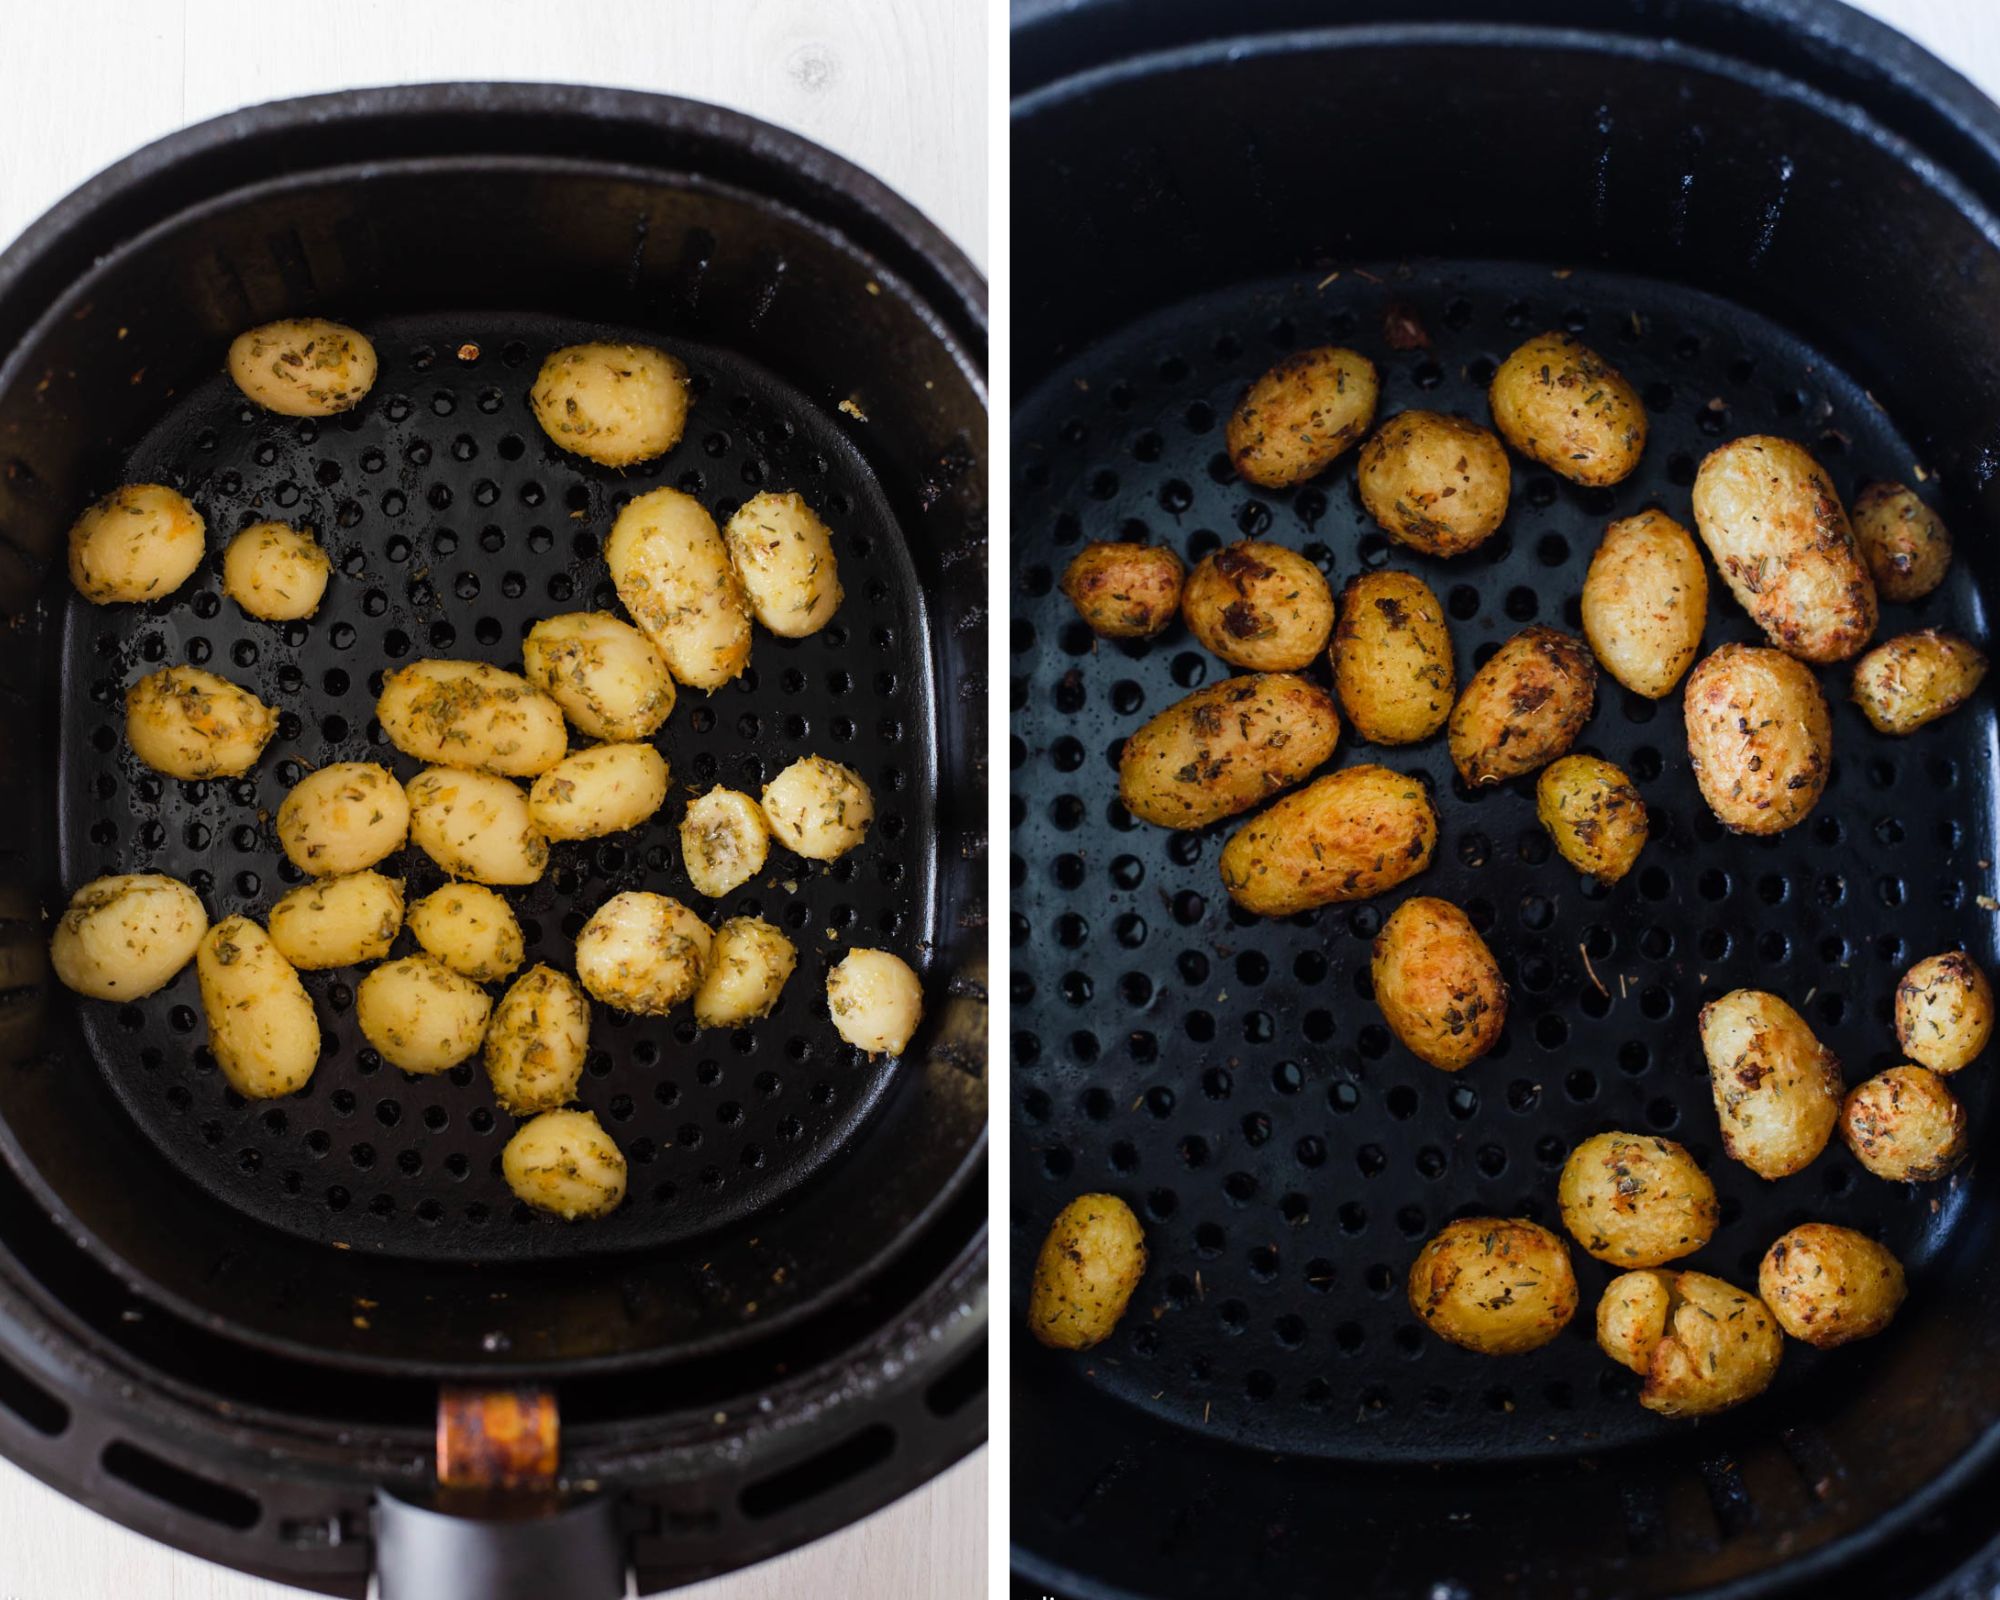 Coated seasoned potatoes before and after roasted in air fryer basket.